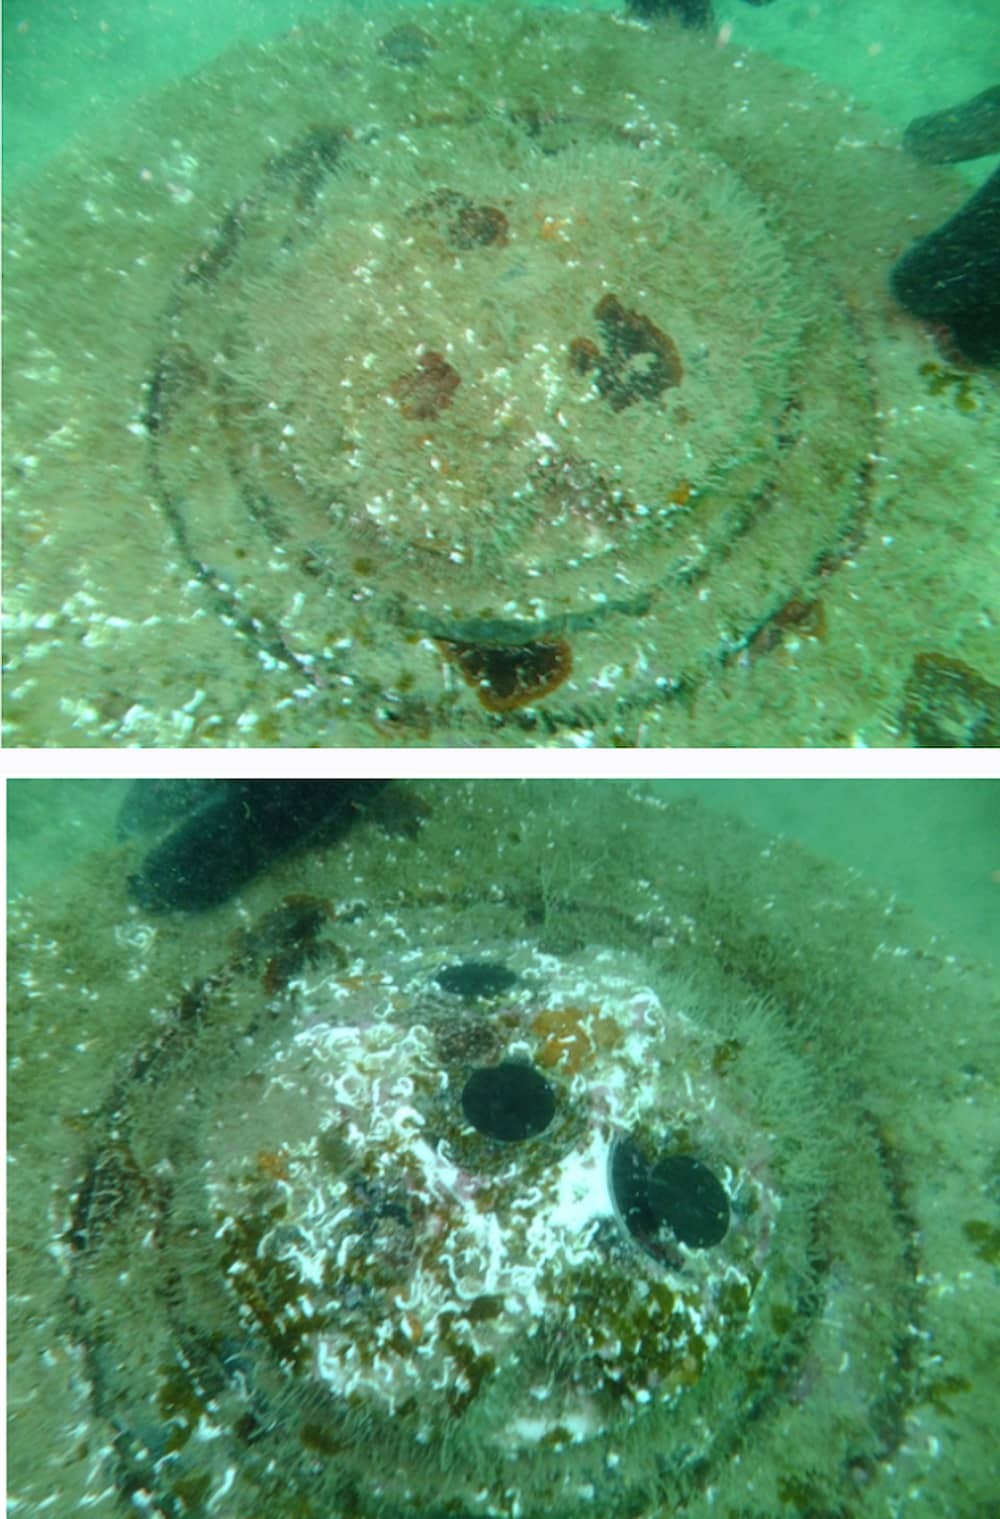 Biofouling adcp 09